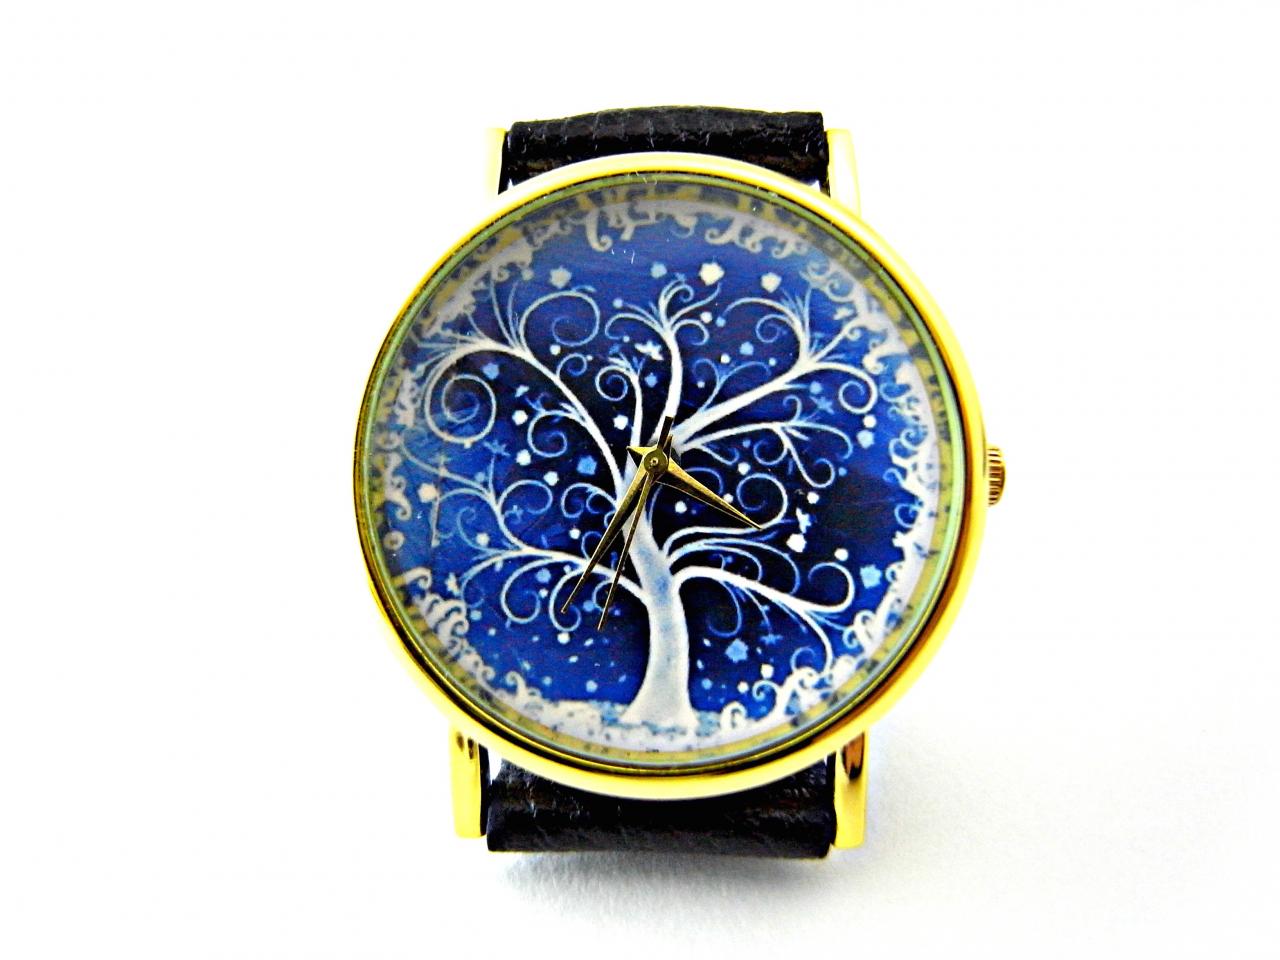 Tree Leather Wrist Watches, Woman Man Lady Unisex Watch, Genuine Leather Handmade Unique Watch #10